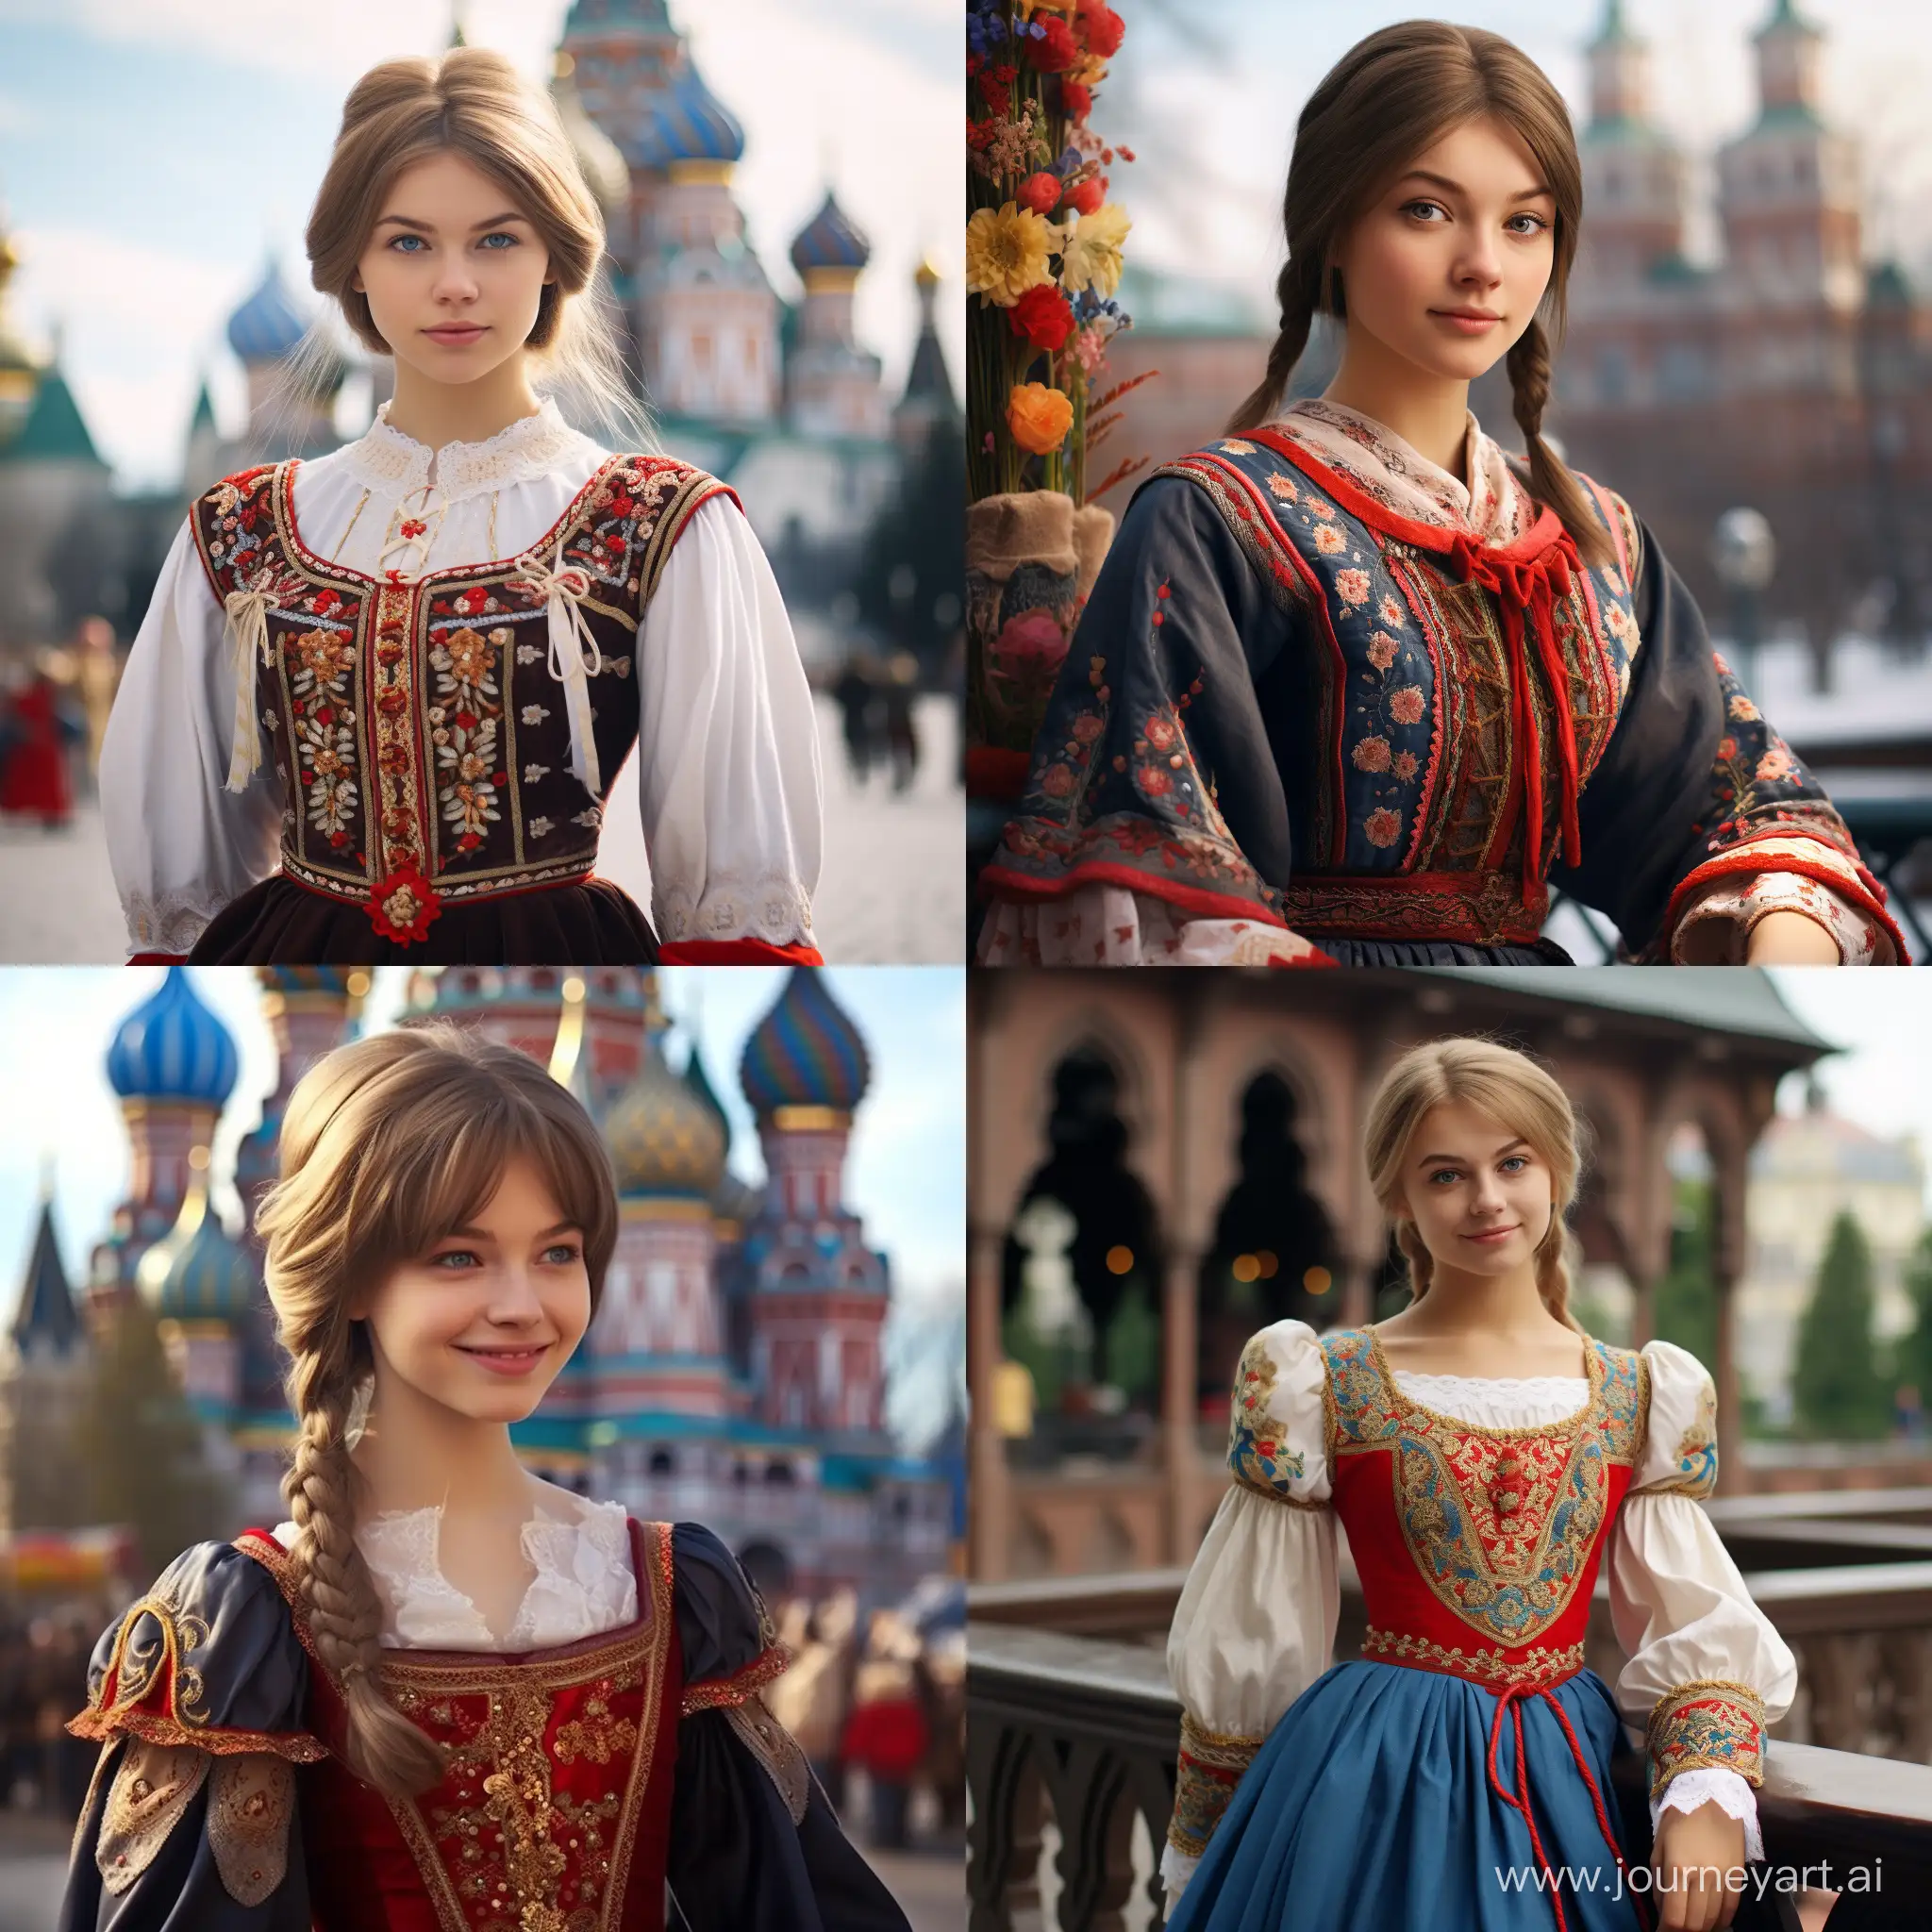 Russian-Anime-Girl-in-Traditional-Folk-Costume-at-the-Kremlin